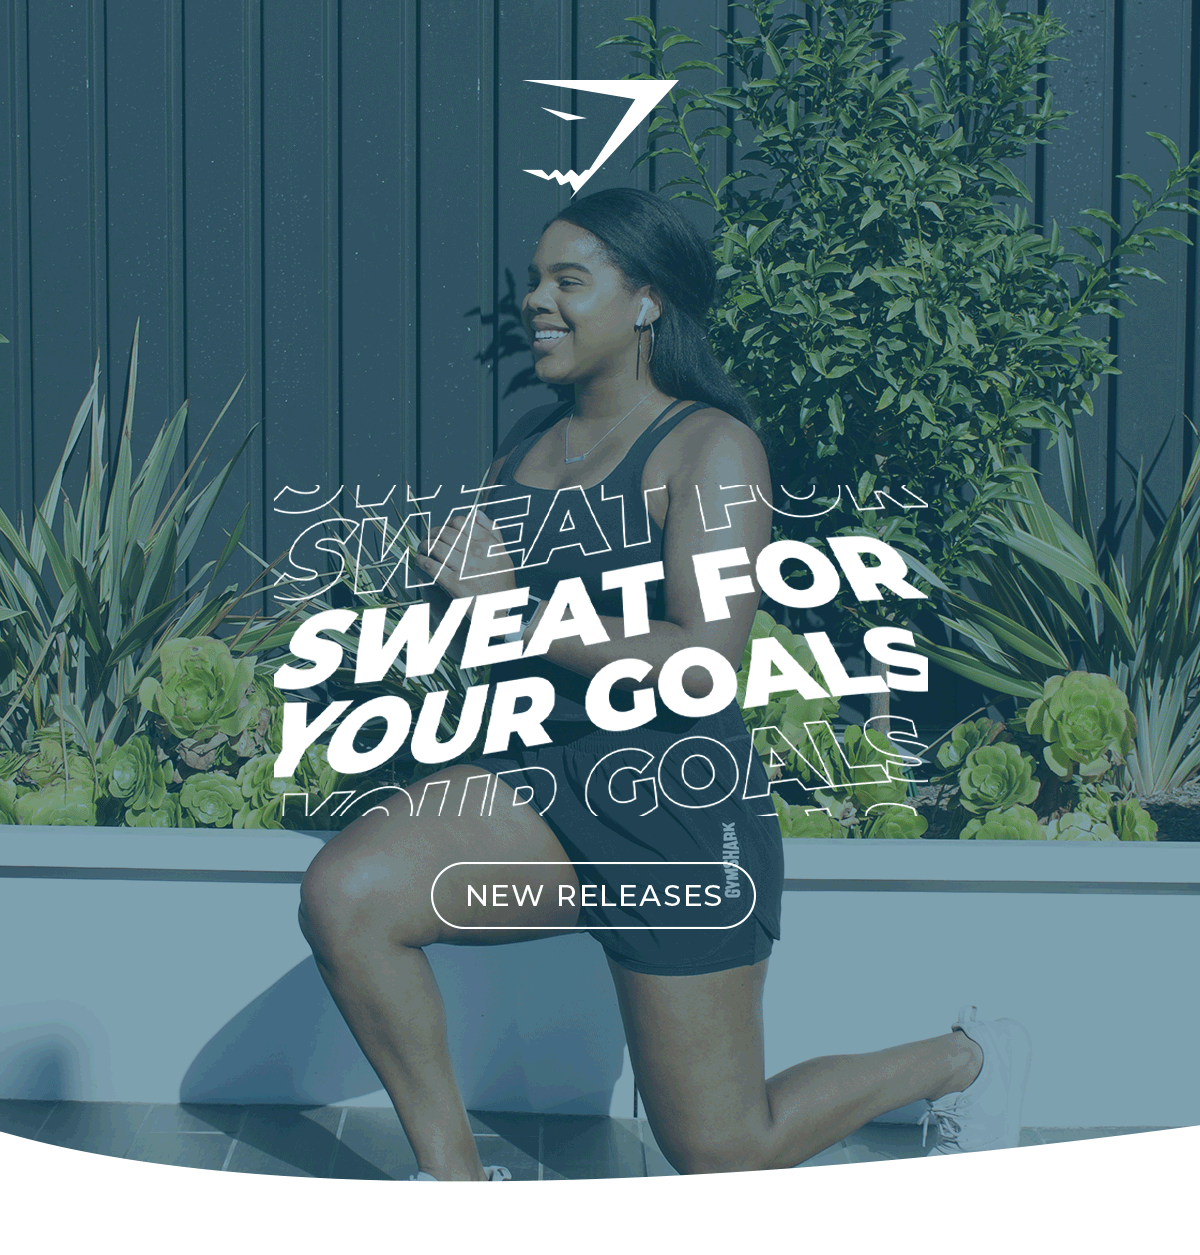 Sweat for goals. New releases.